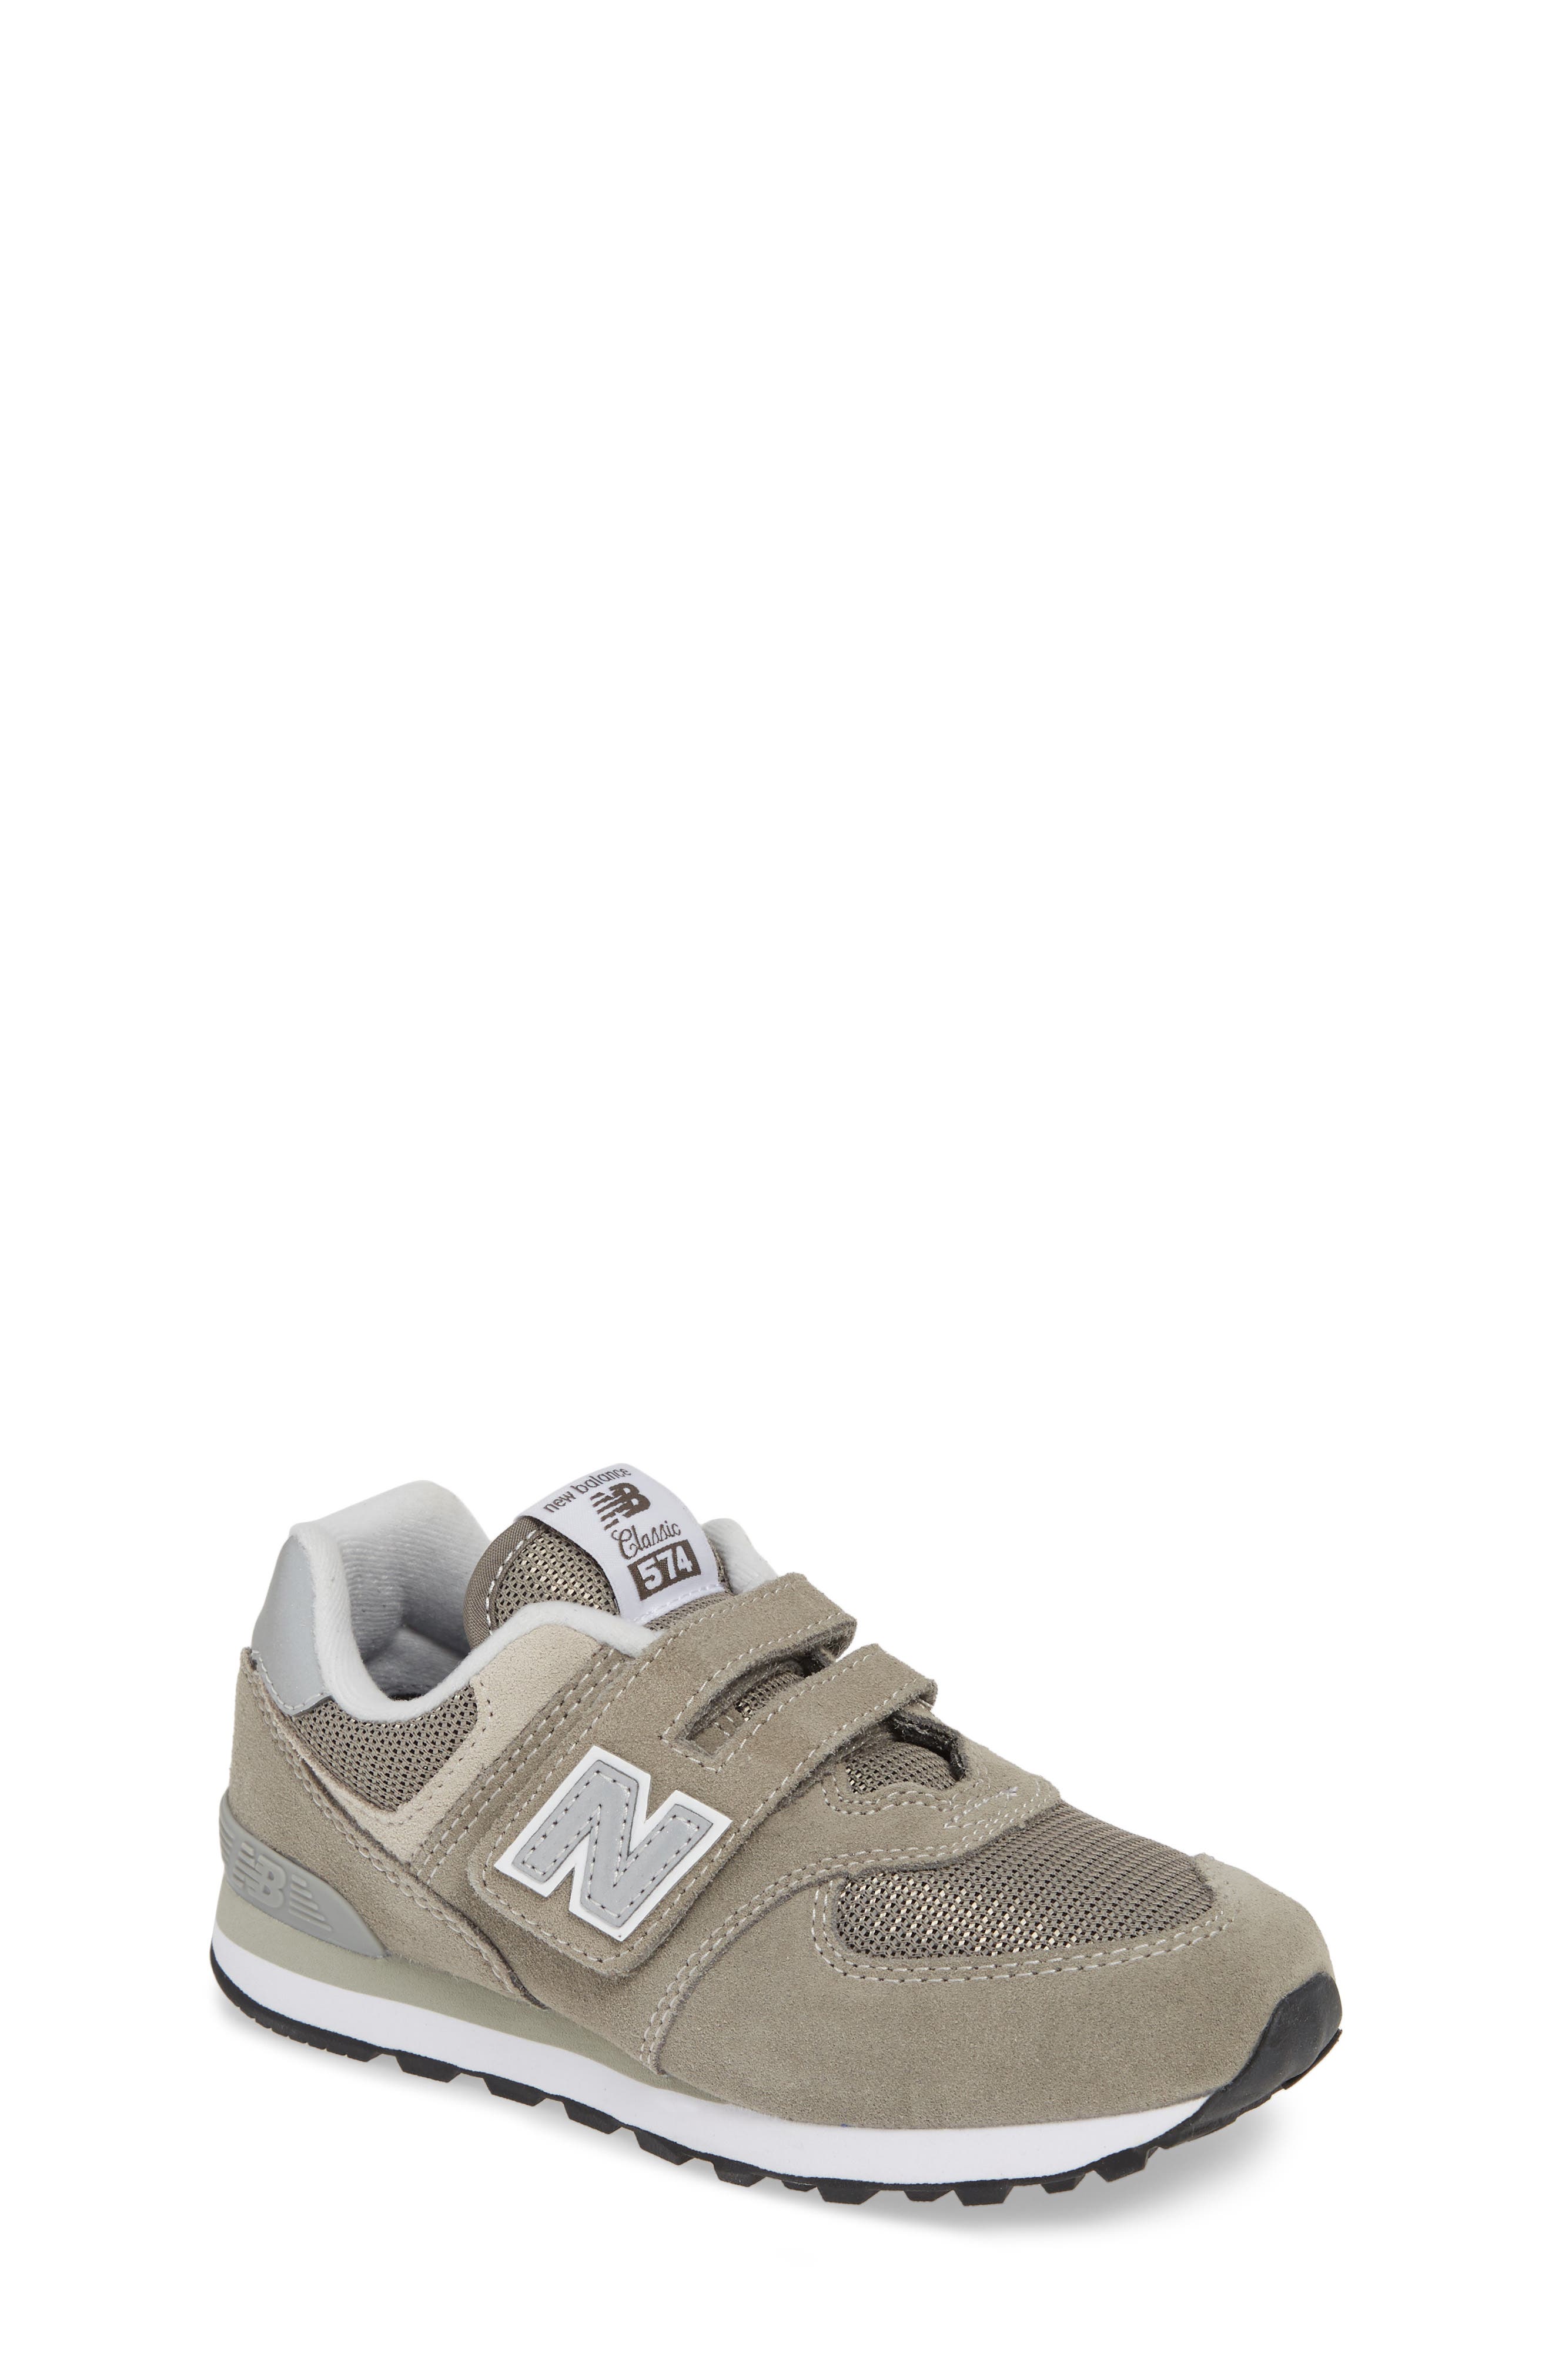 new balance shoes baby